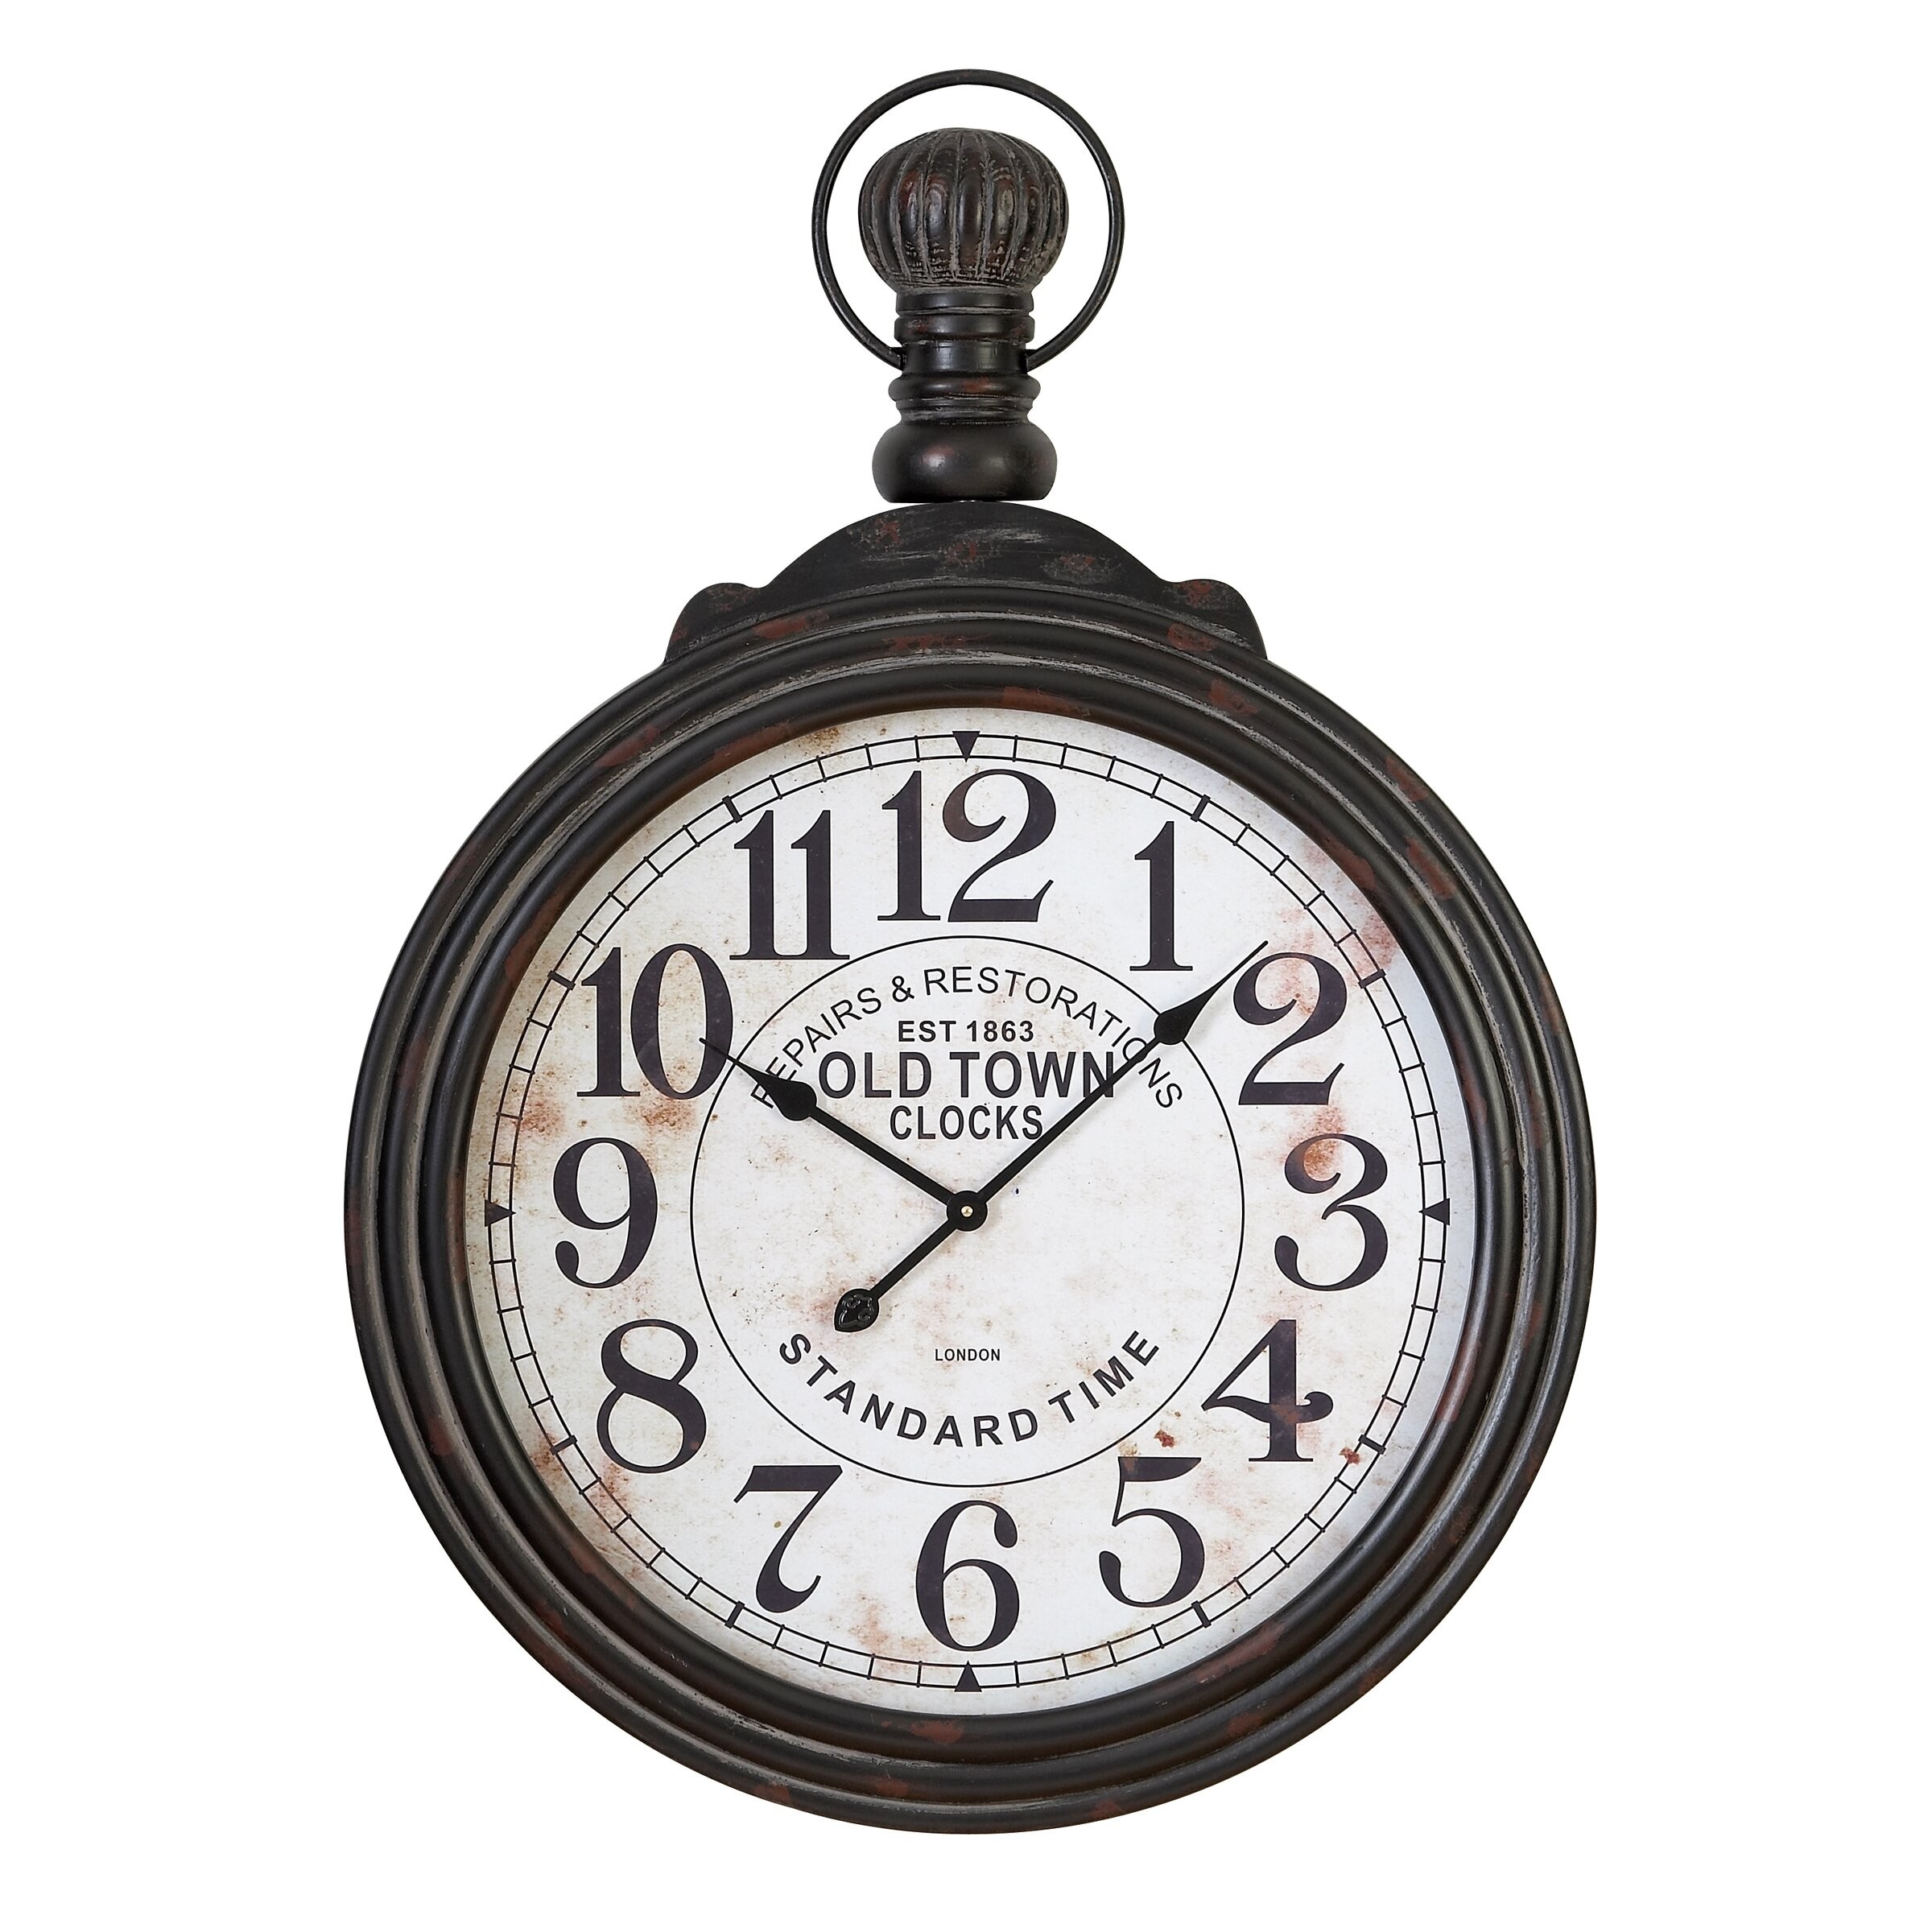 Aspire 39 pocket watch style large wall clock